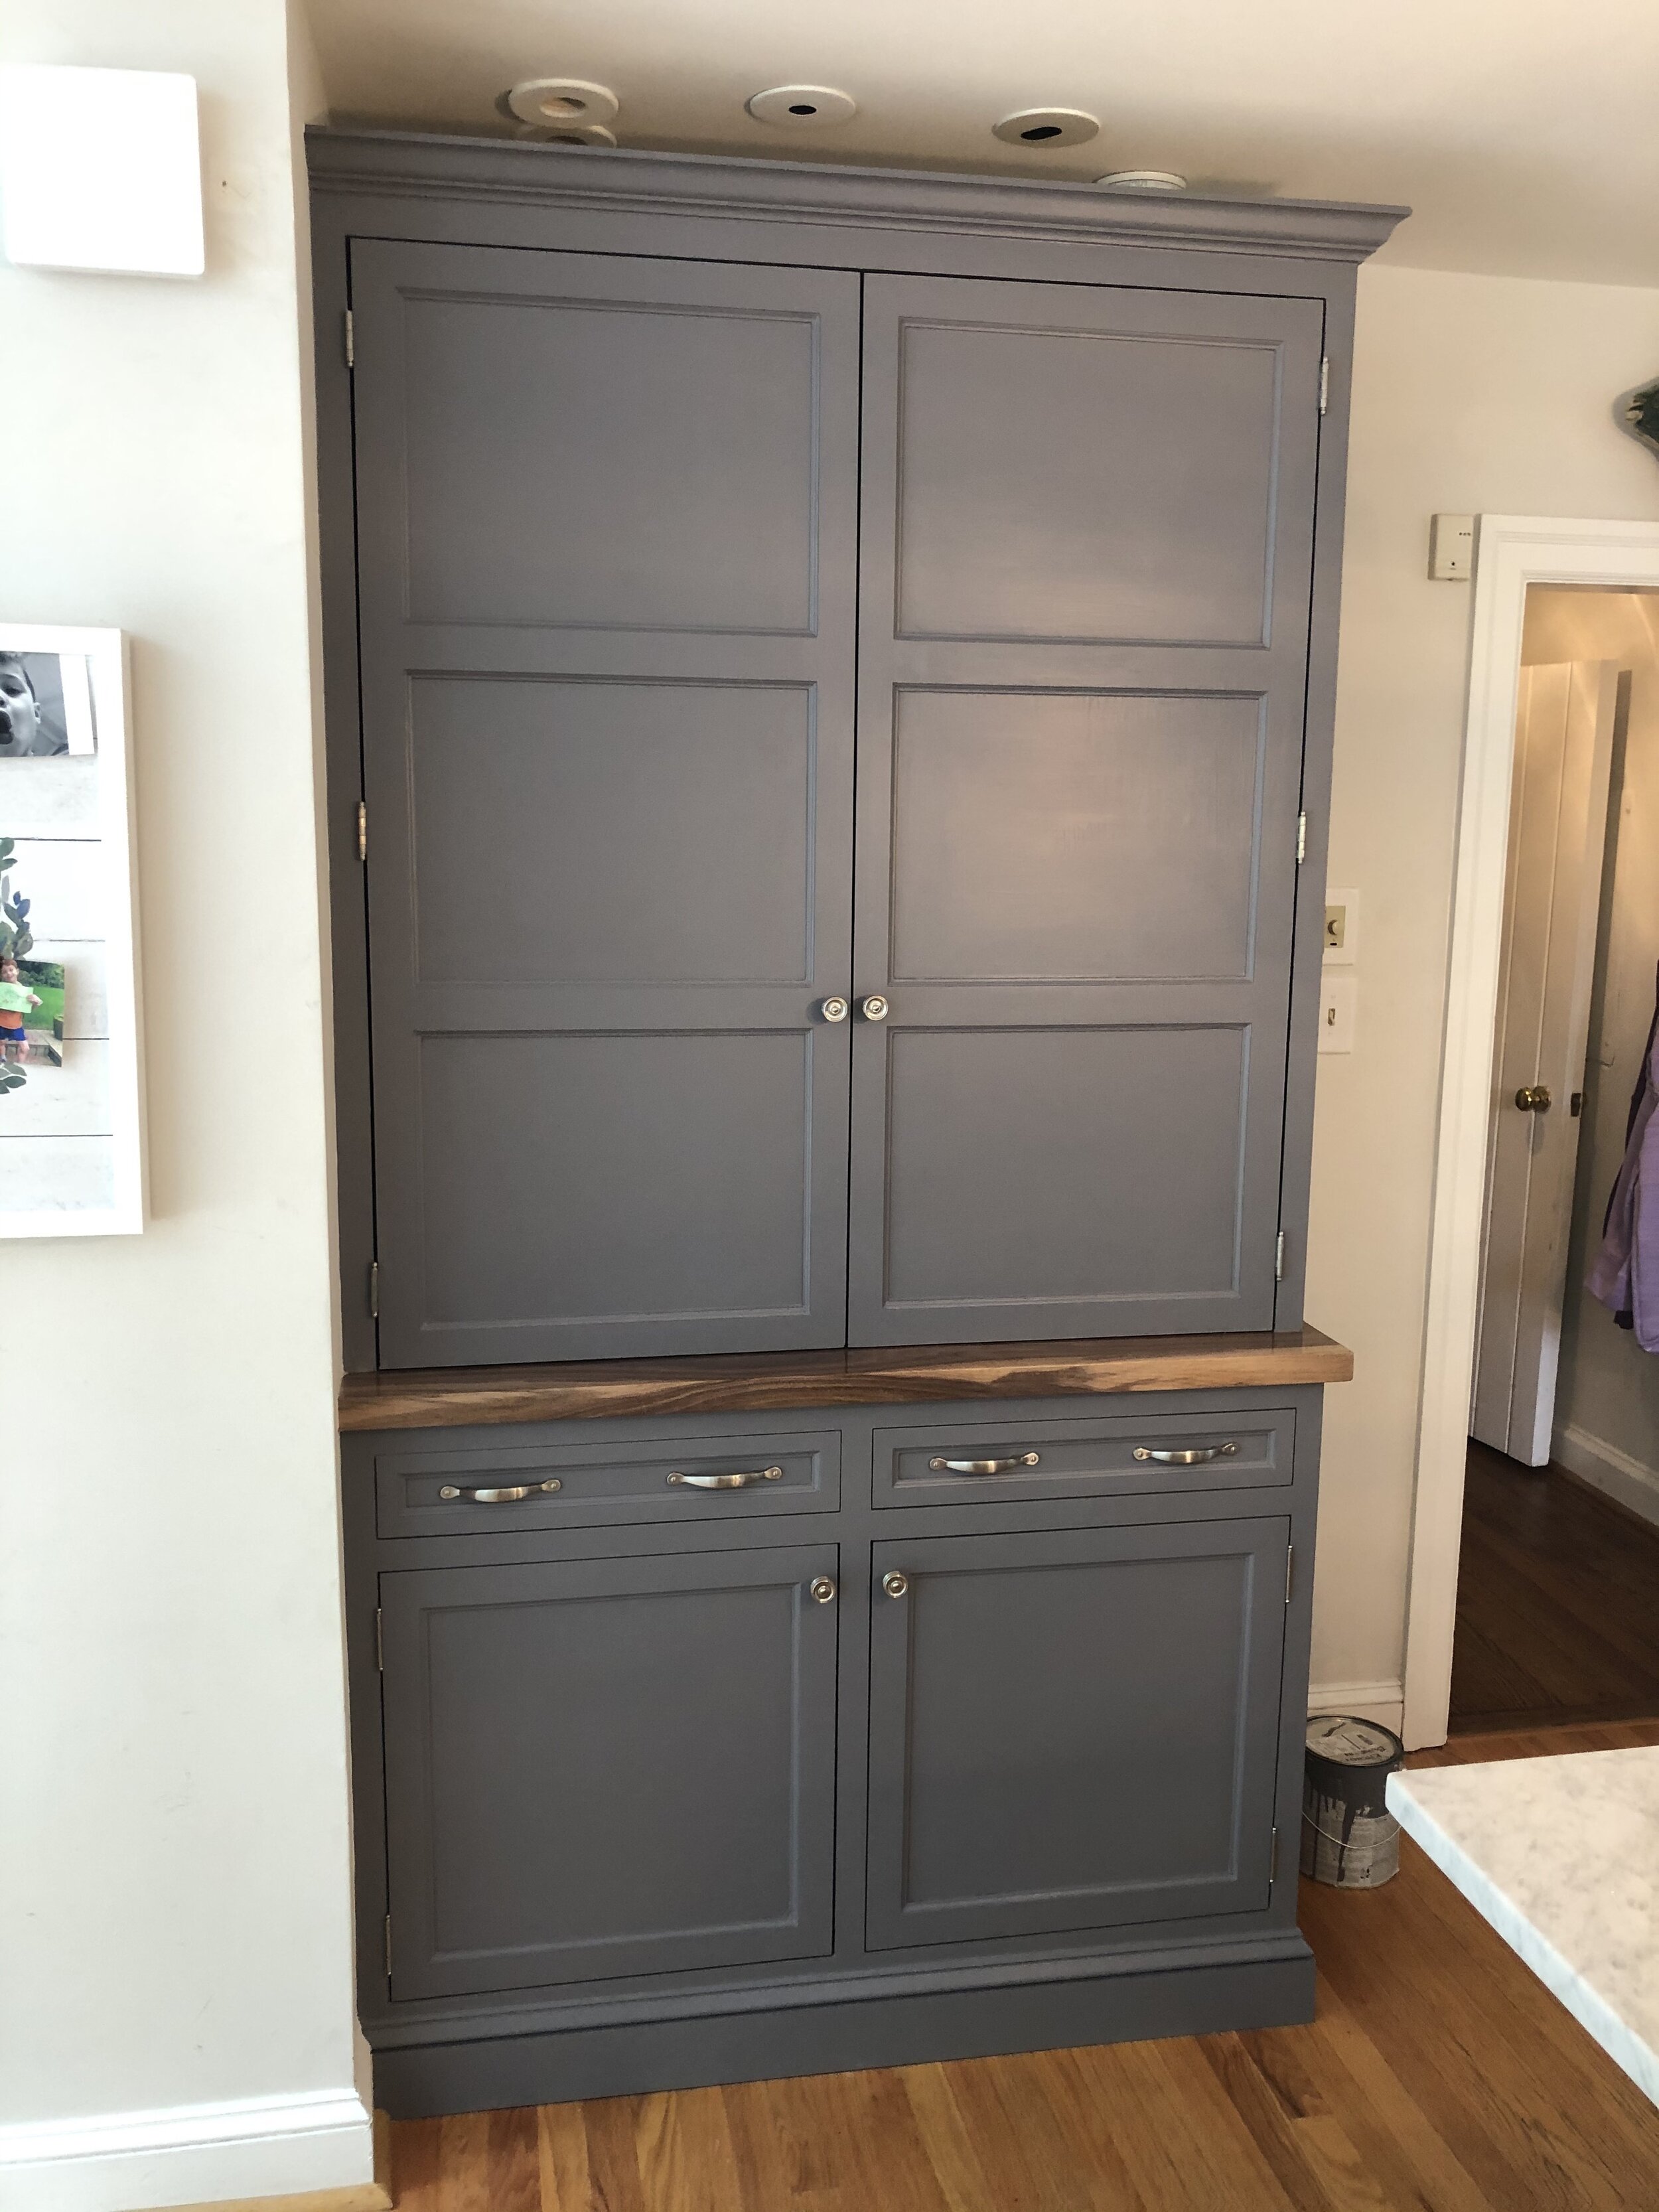  I created this built-in hutch for a client who wanted to replace an existing kitchen desk in order to gain more usable storage space.  